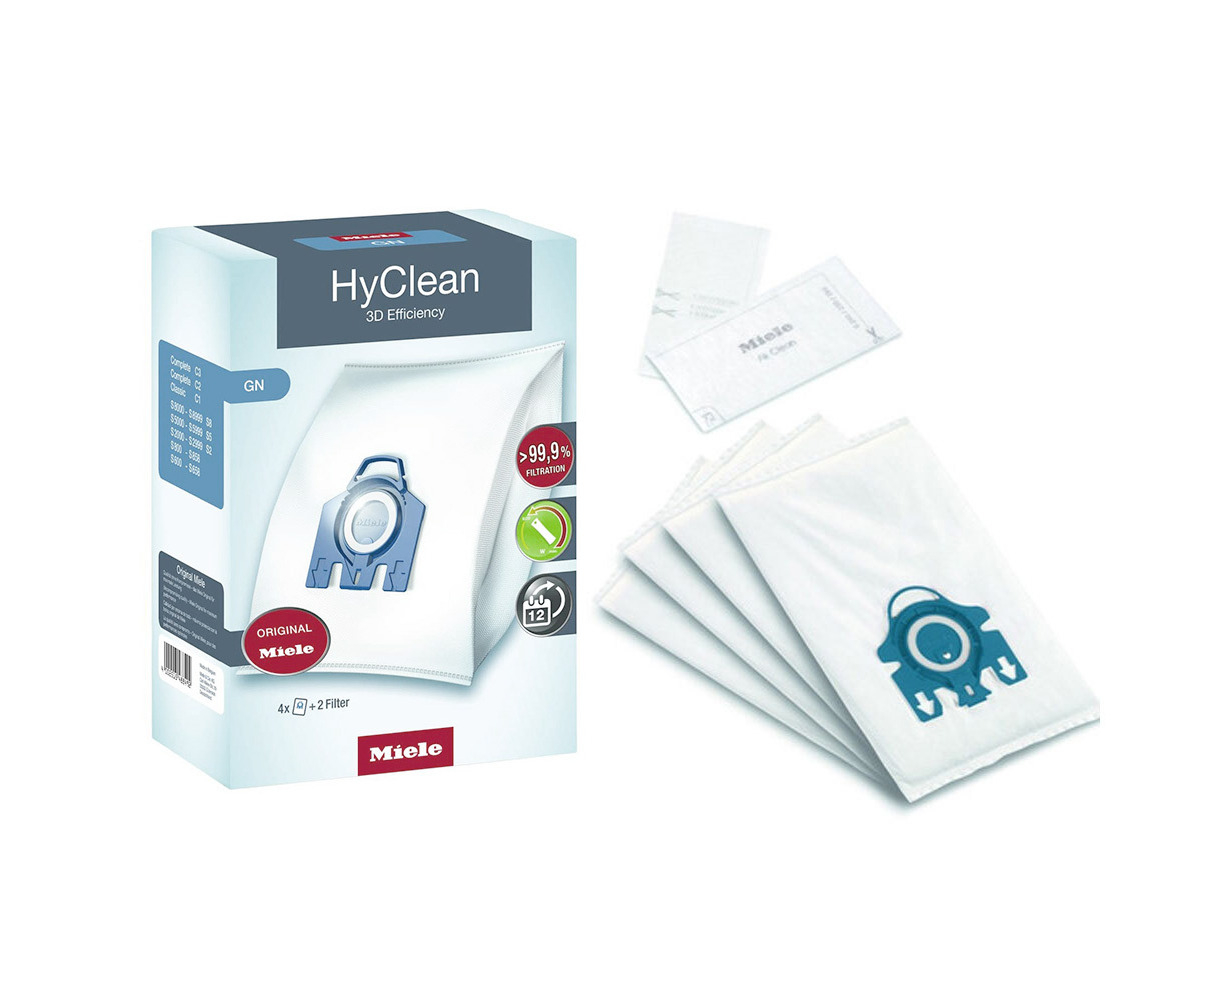 4pc Miele Original Vacuum Cleaner Bags Hyclean Gn Synthetic f/ 5000/8000  Series